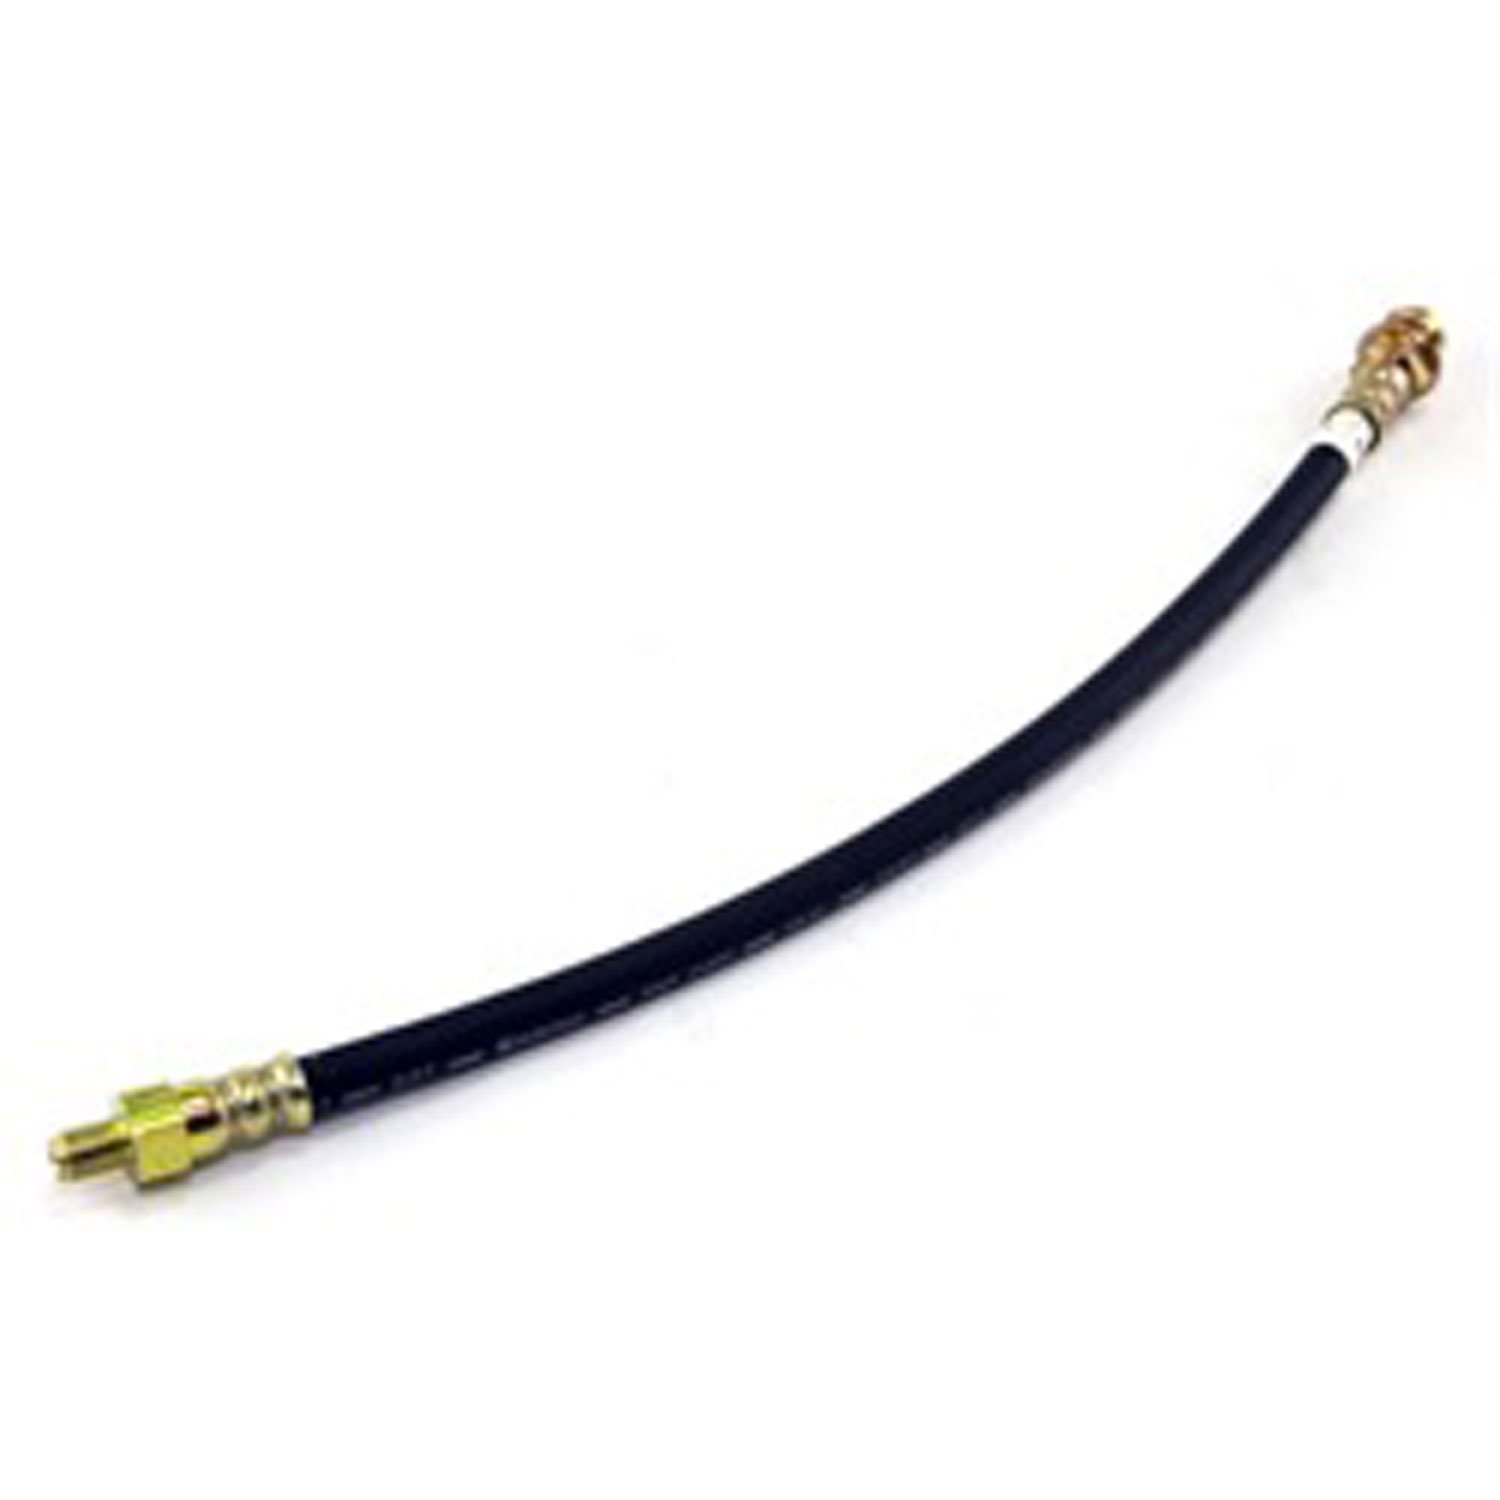 This replacement 16 inch flexible rear brake hose from Omix-ADA fits 41-66 Ford/Willys and Jeep models.